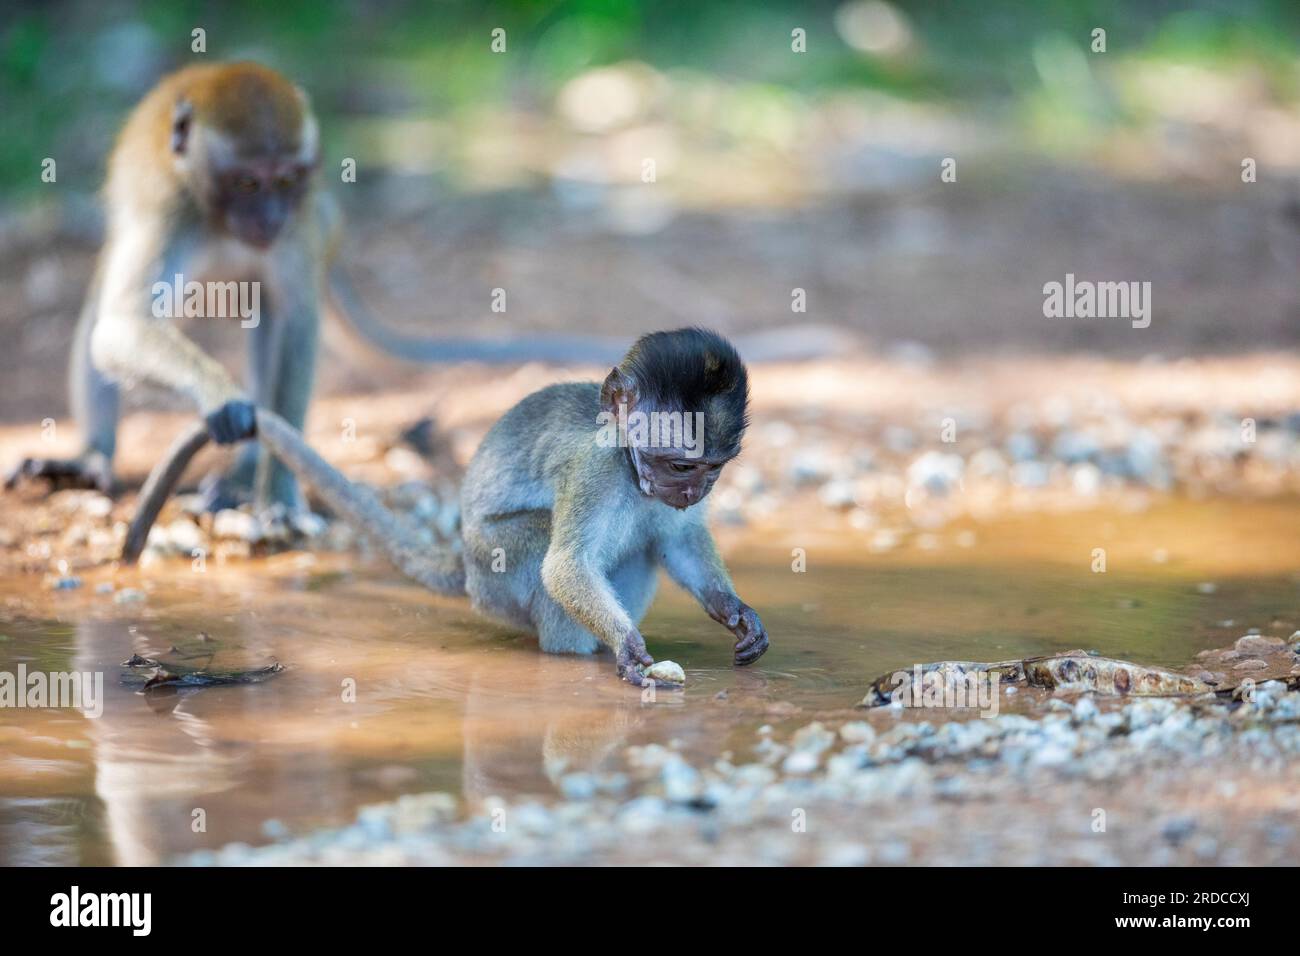 A long-tailed macaque infant forages in the water of a muddy puddle on a dirt trail, Singapore Stock Photo